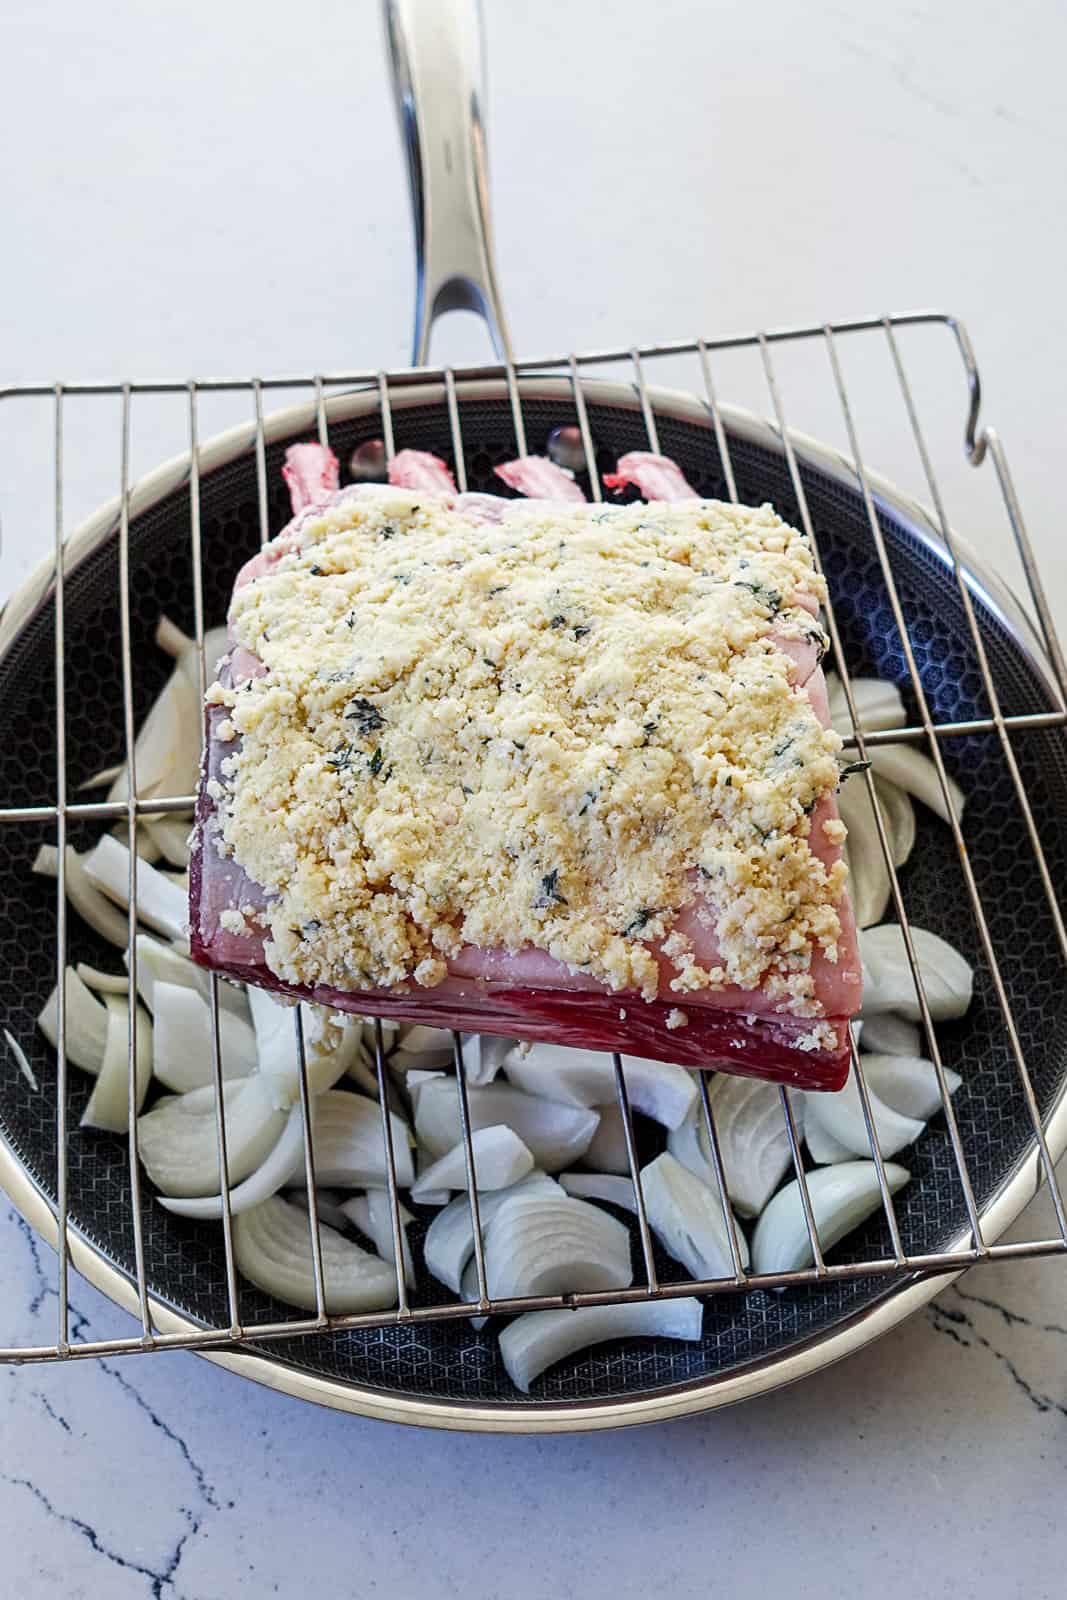 Rack of lamb with crust on top of onions in a pan